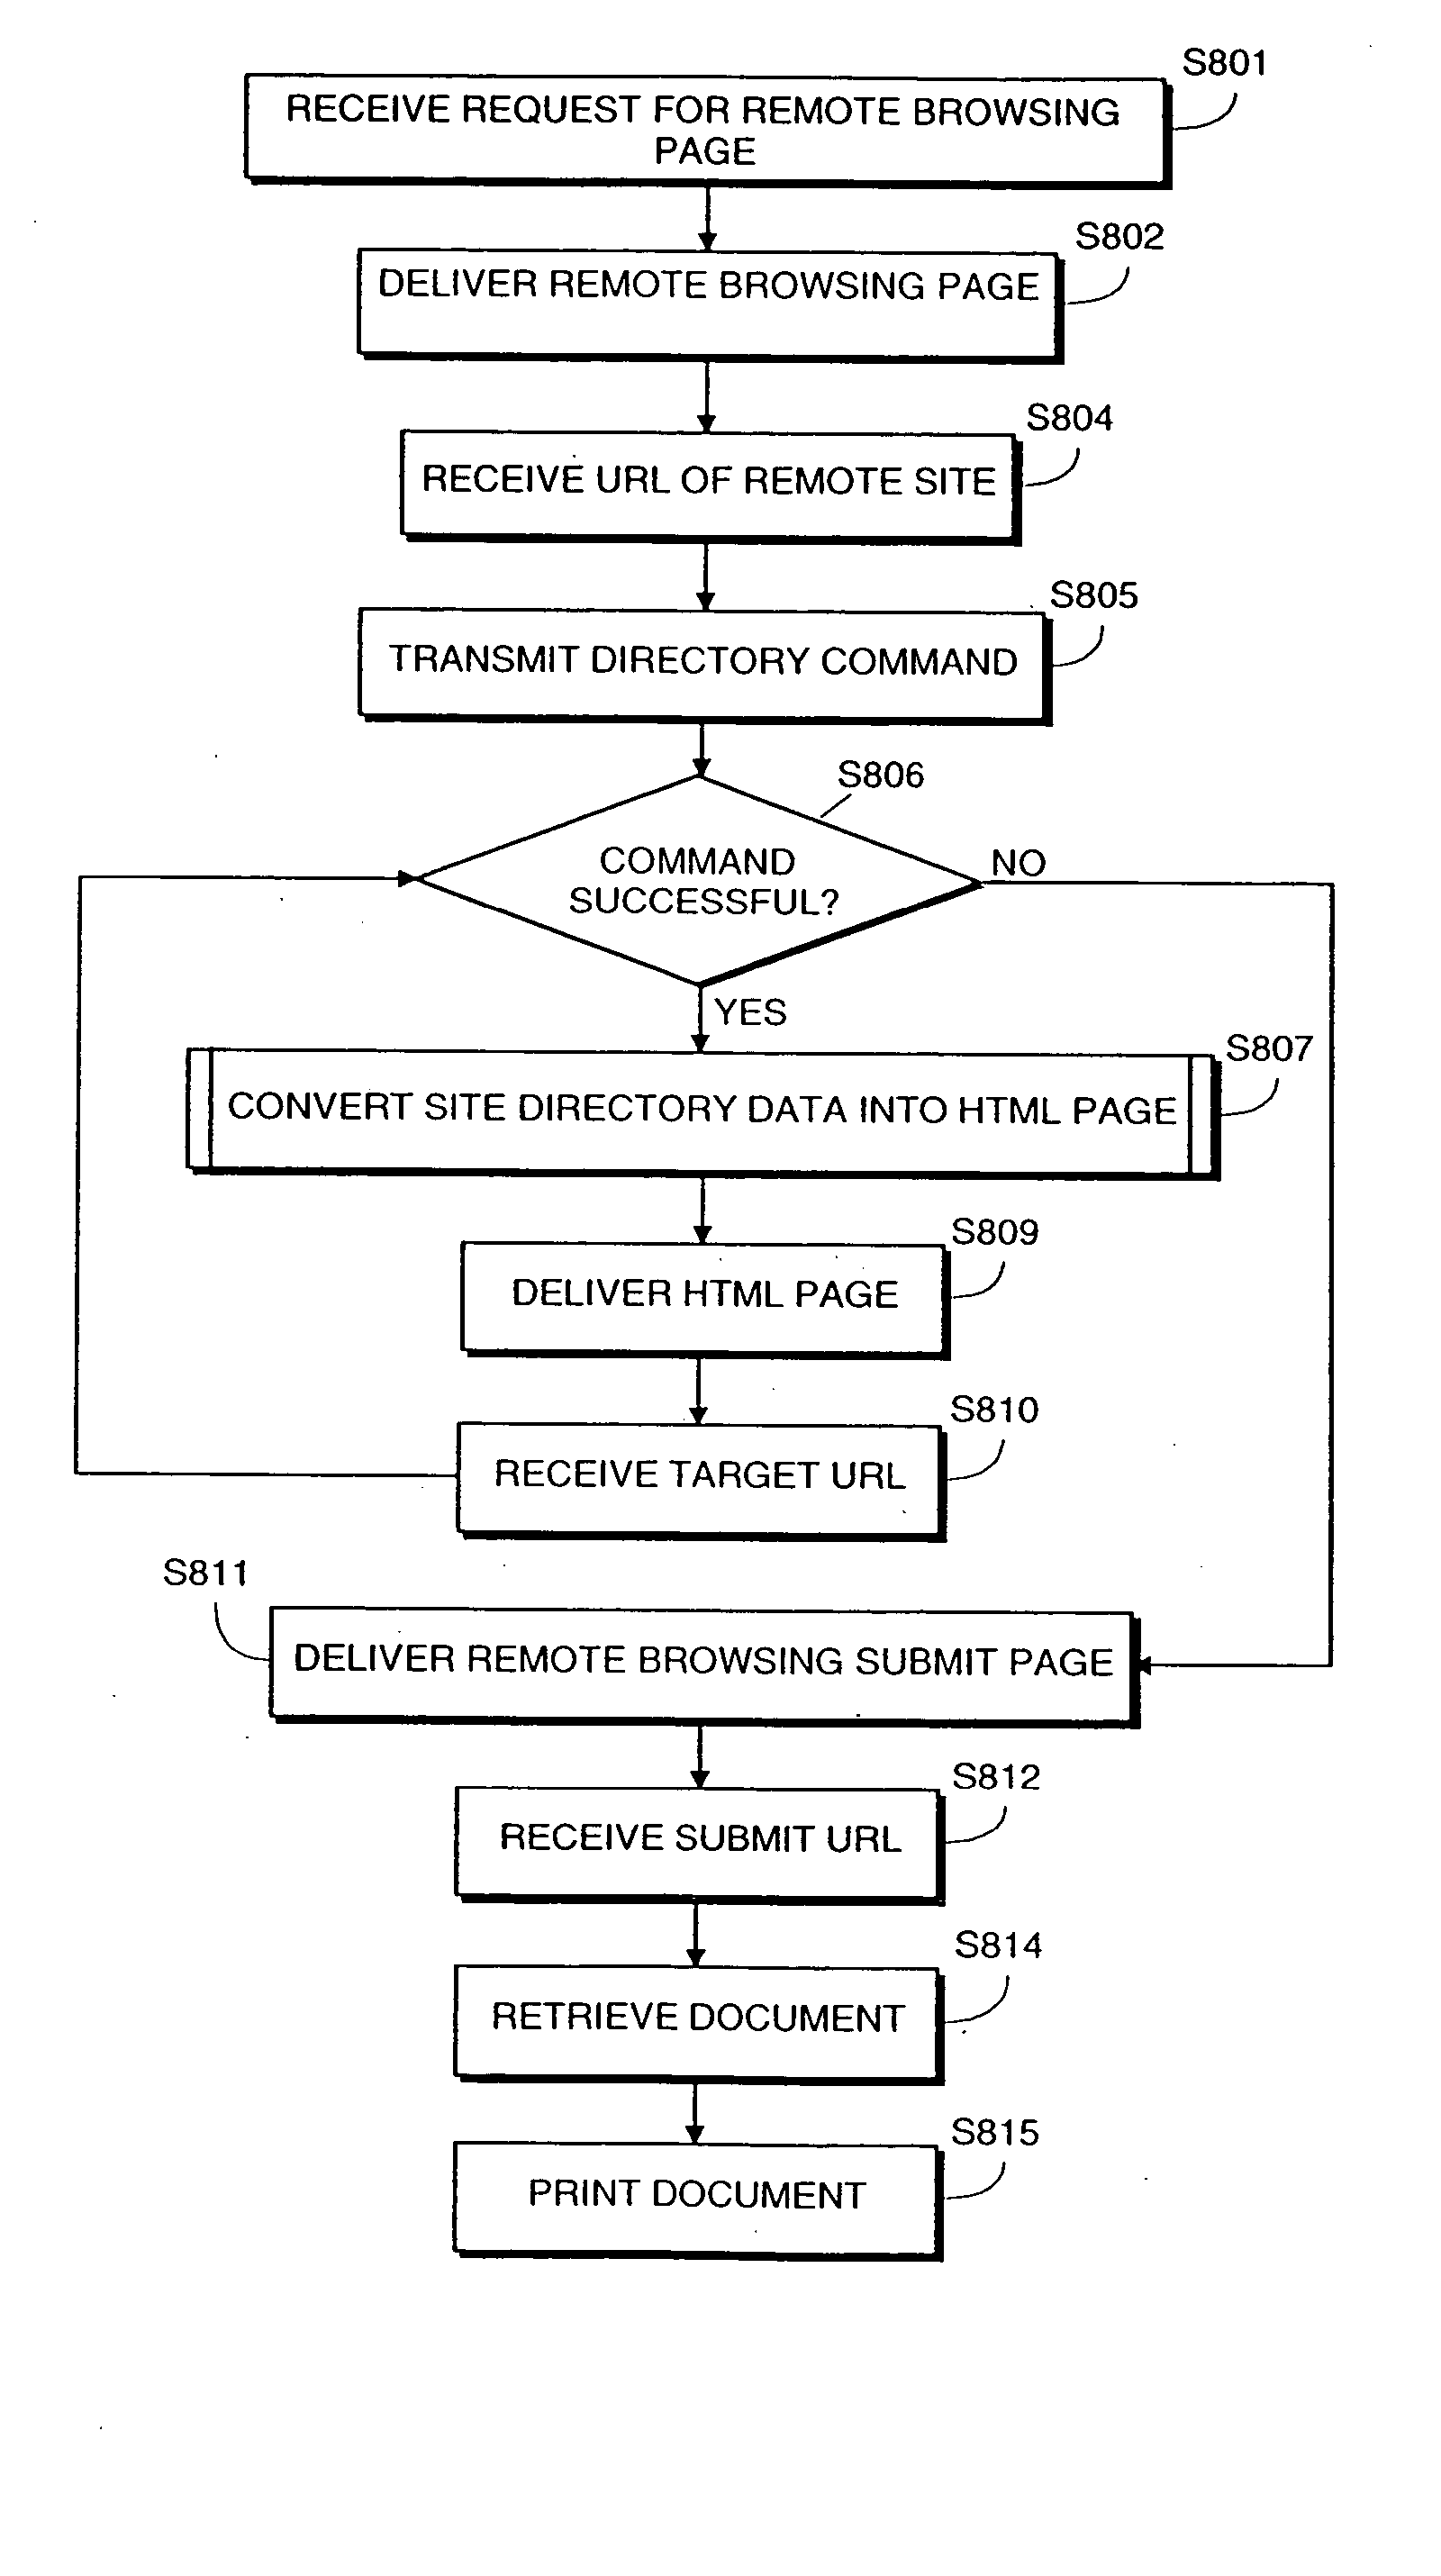 System for retrieving and printing network documents